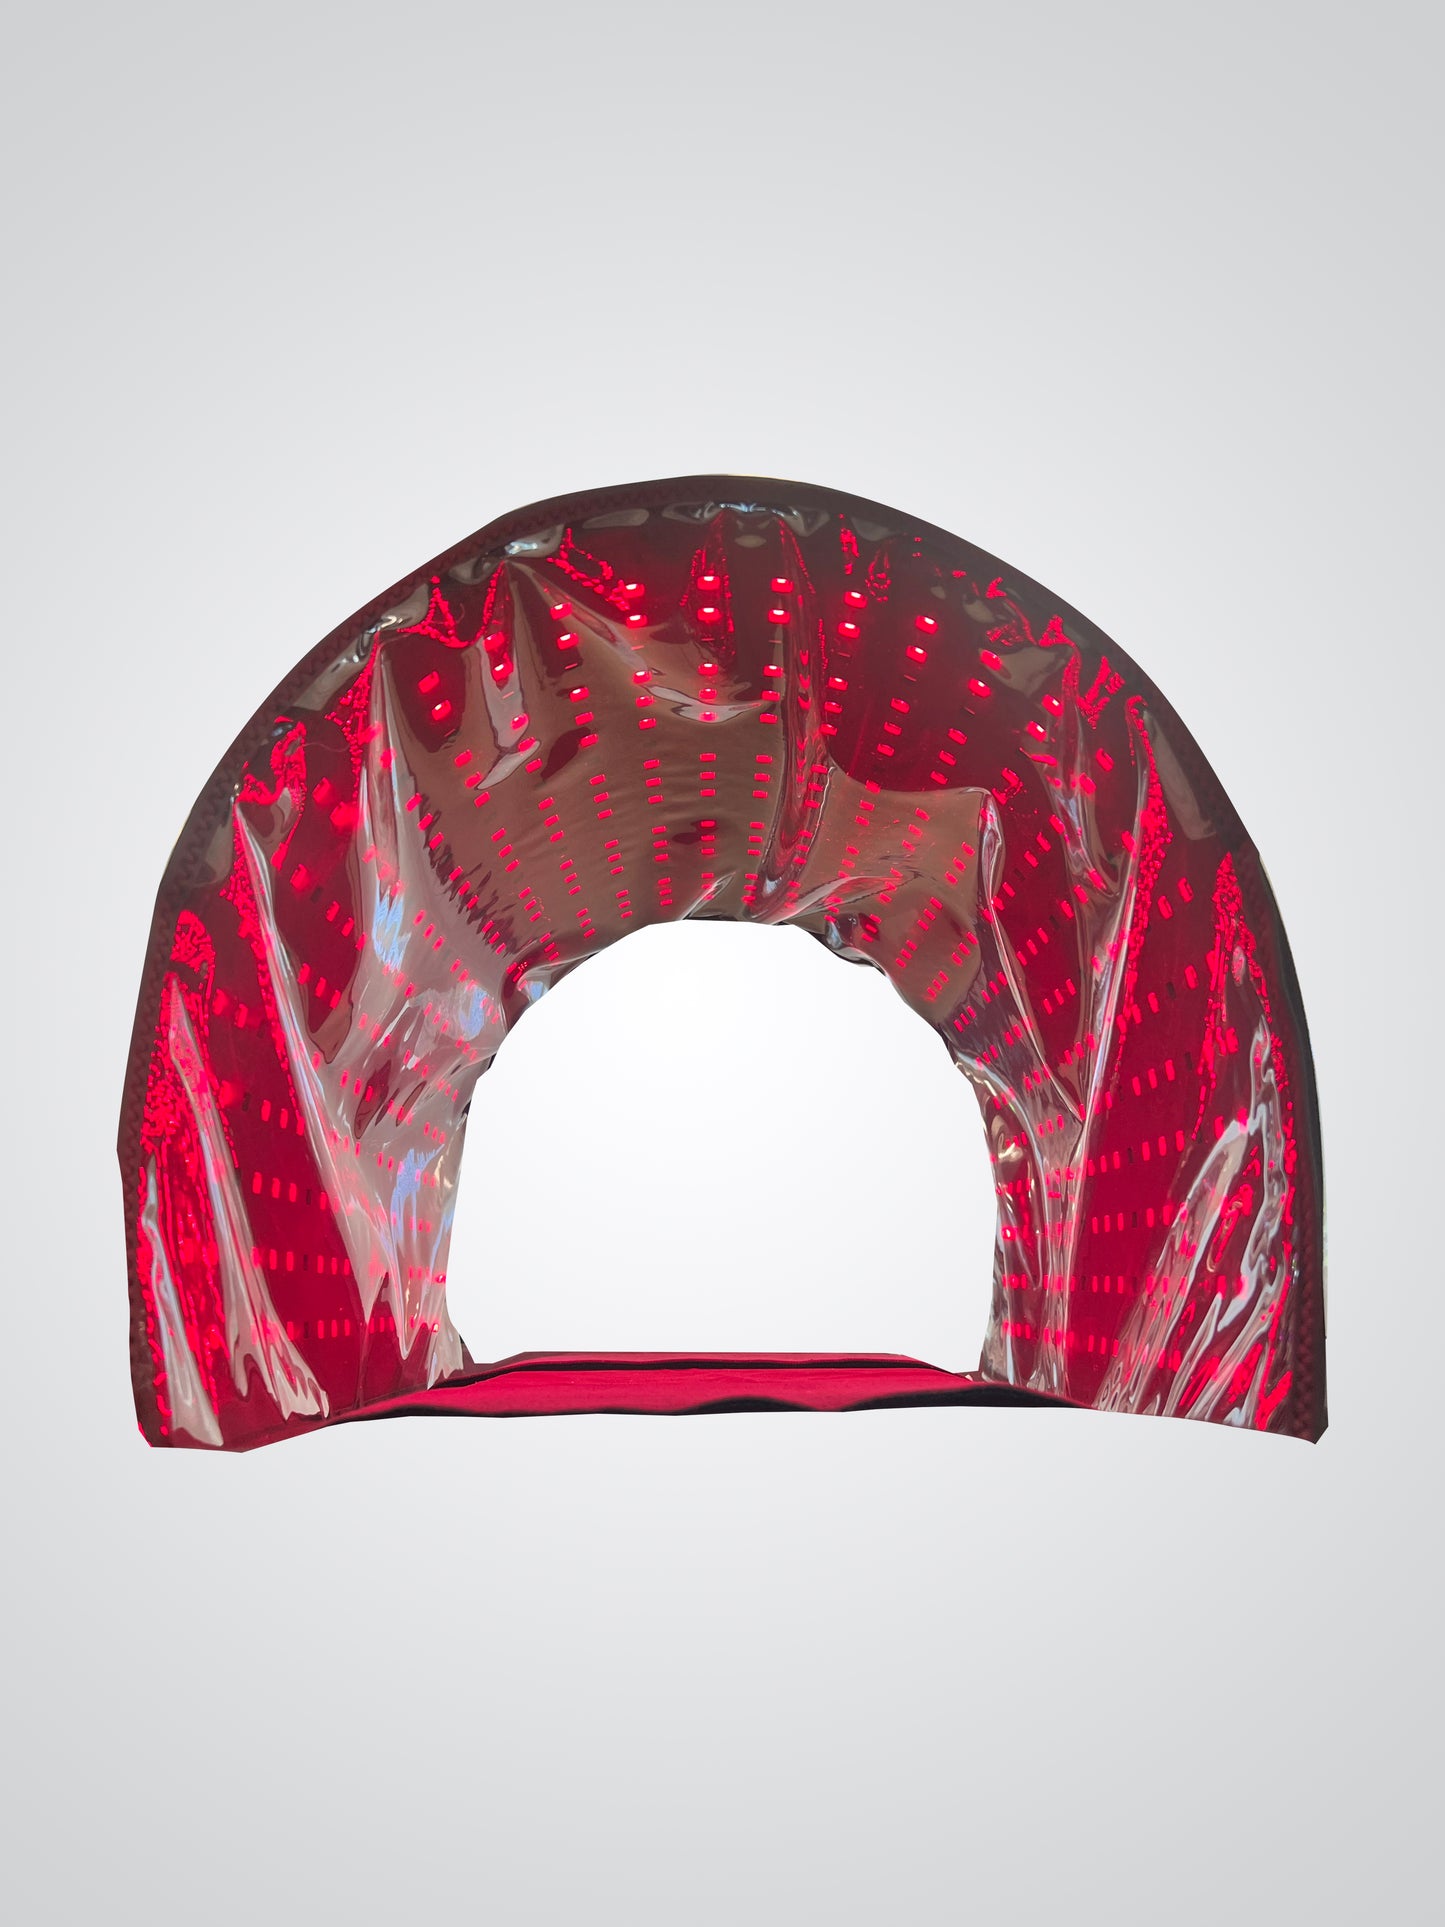 ELEVE™ FACE DOME UPPER SIDE